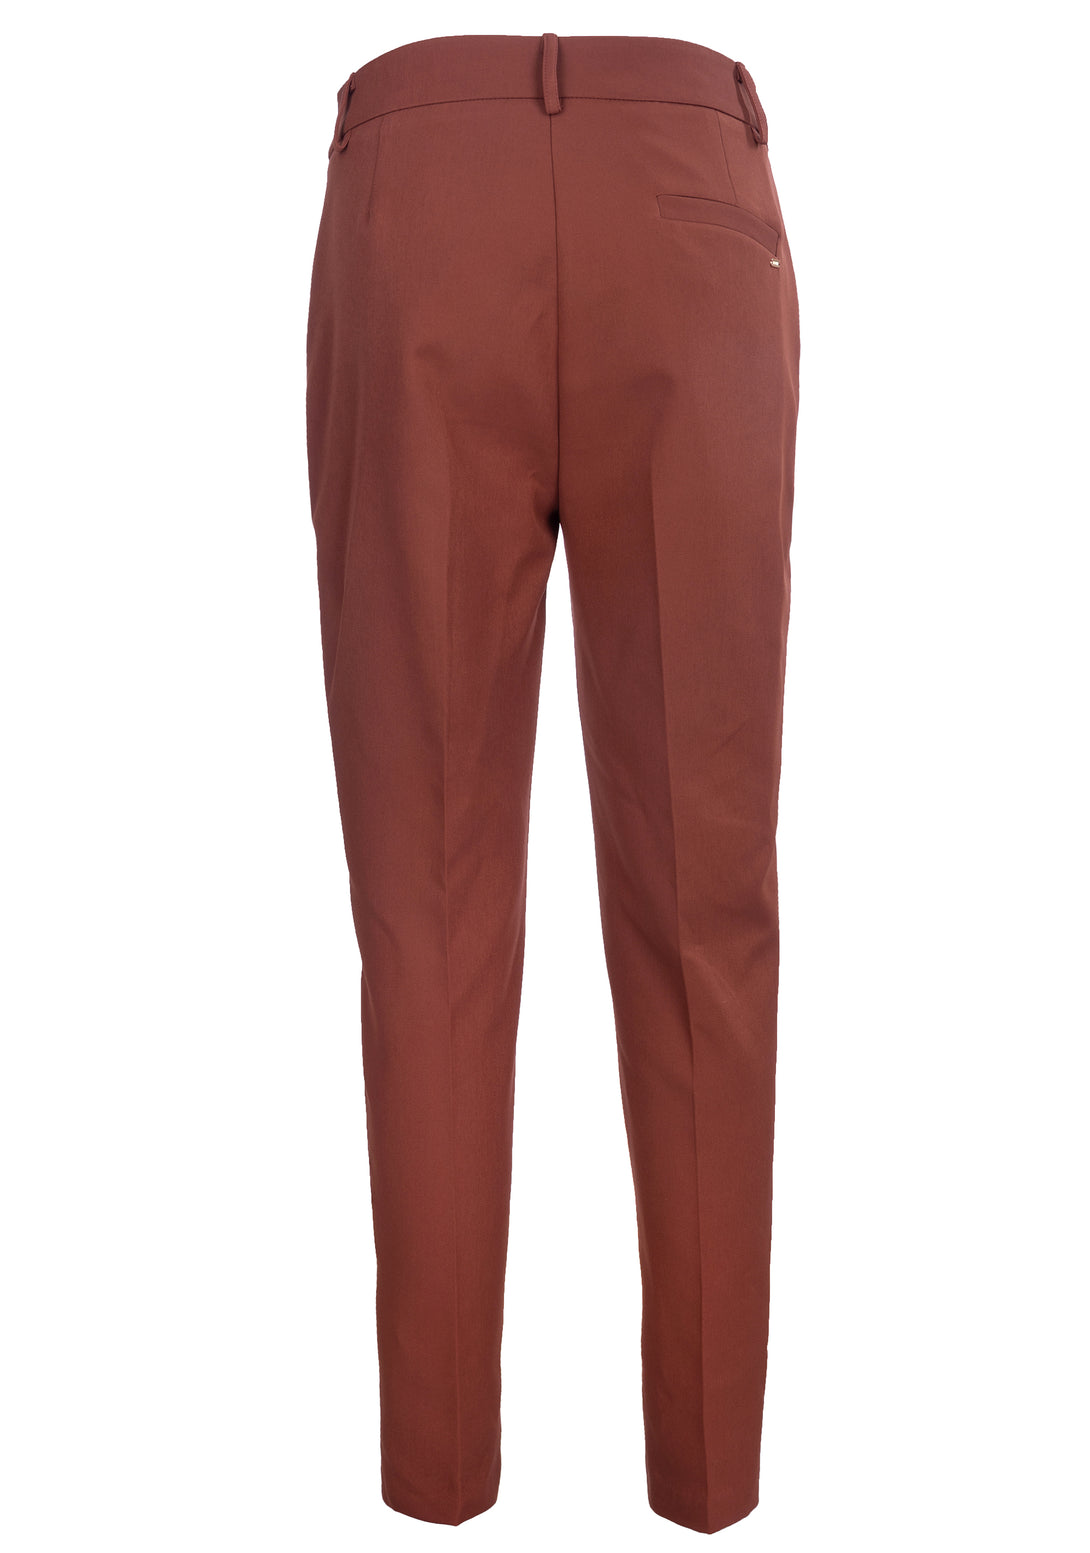 Chinos pant regular fit made in Milano stitch fabric